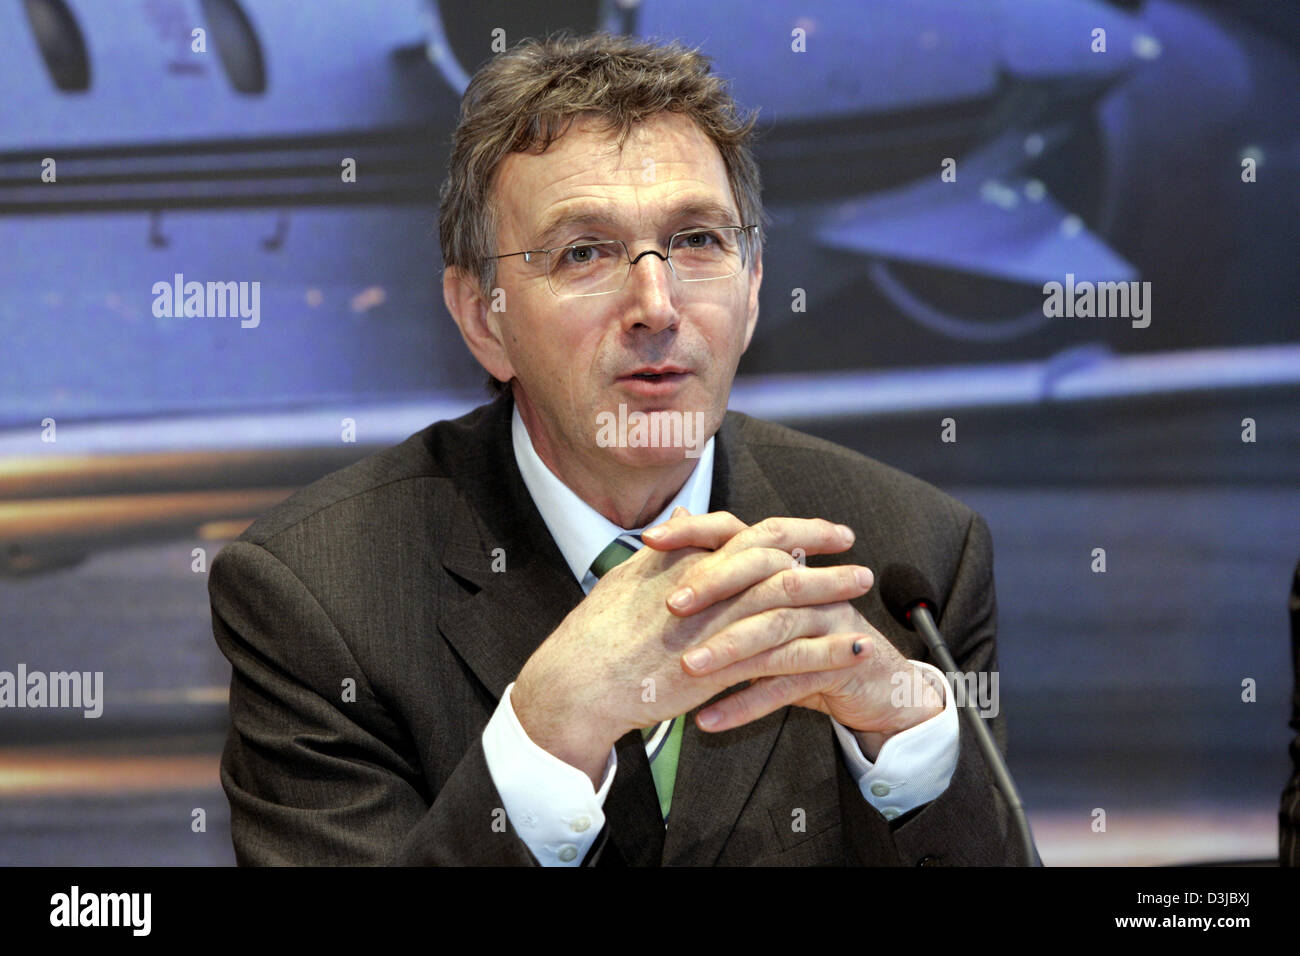 (dpa) - Wolfgang Mayrhuber, Chairman of Deutsche Lufthansa AG, pictured during a press conference in Munich, Germany, 09 March 2005. Stock Photo